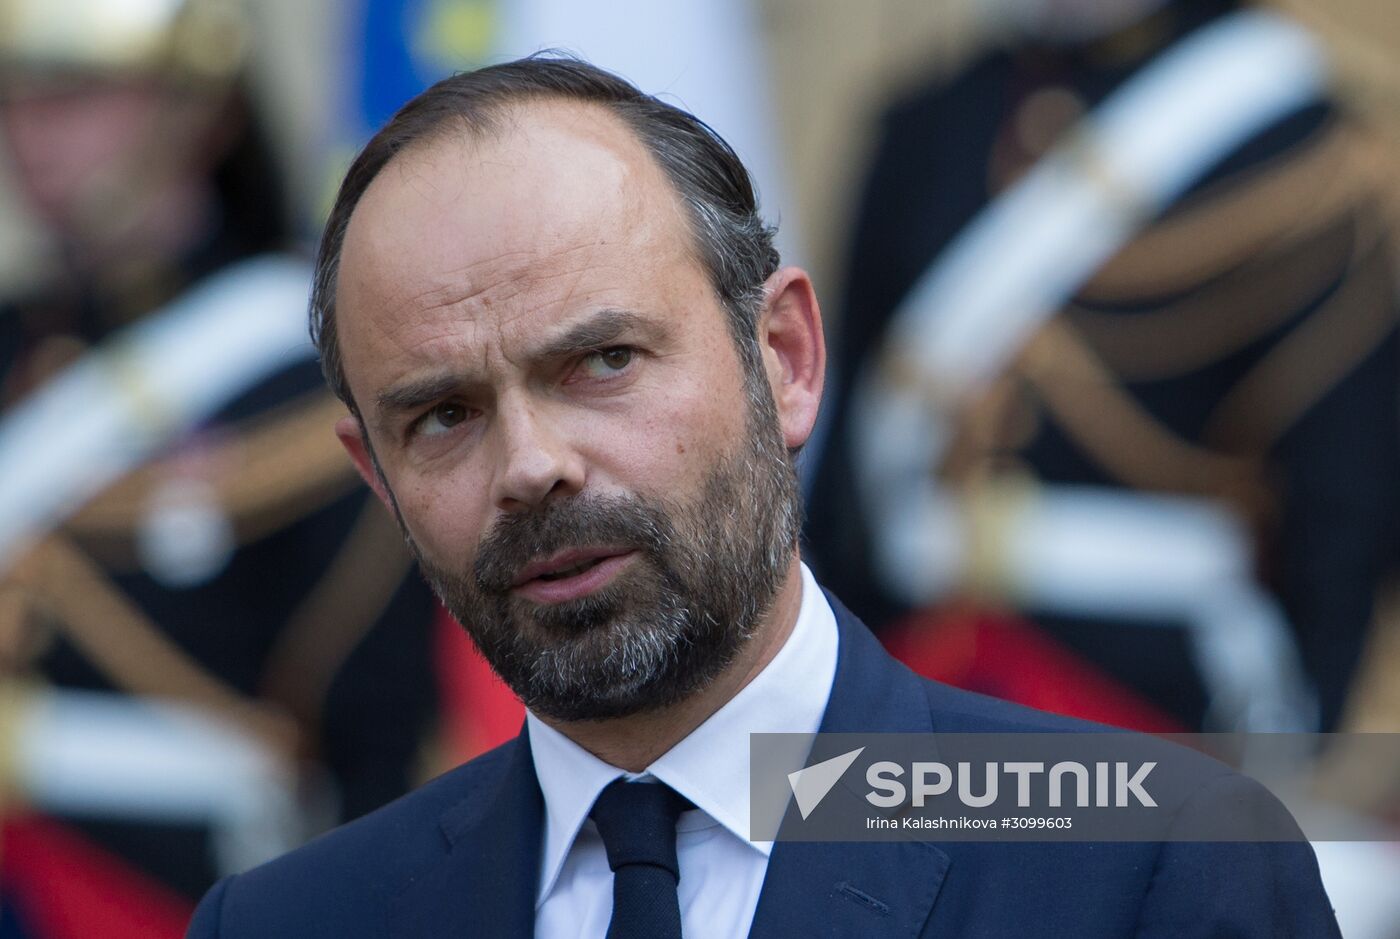 Edouard Philippe appointed new French Prime Minister